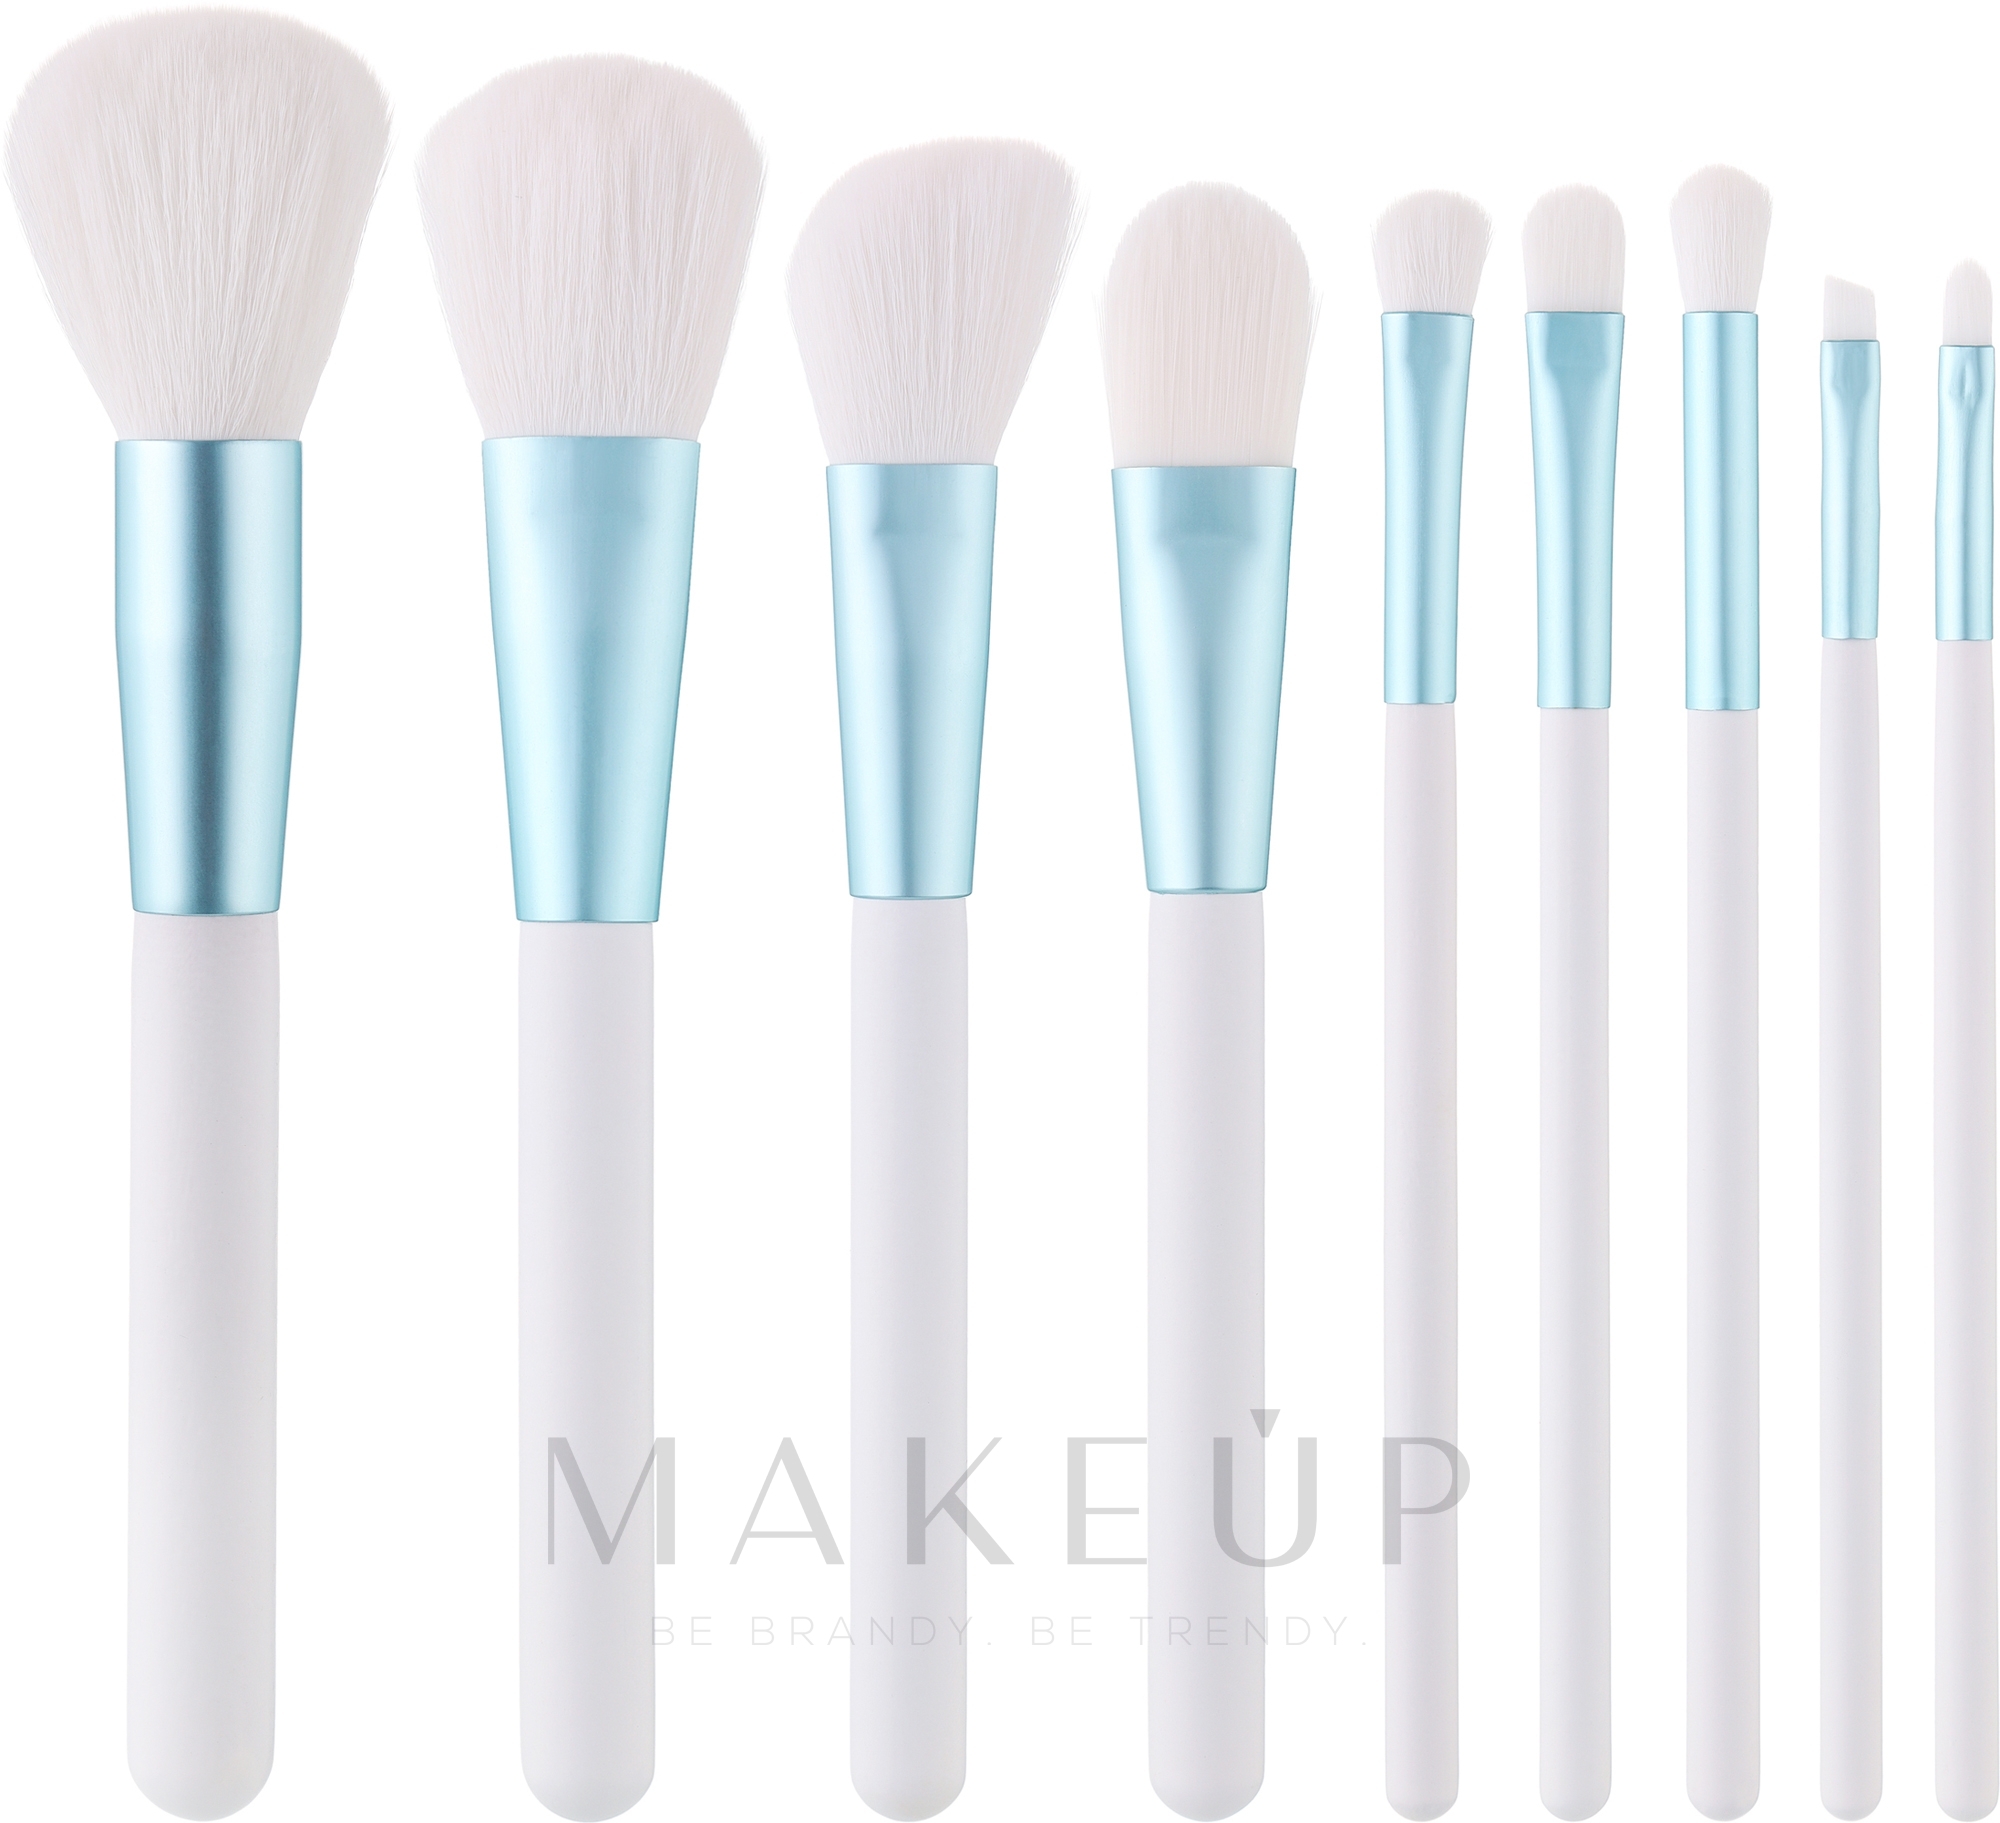 Make-up Pinselset 9-tlg. weiß-hellblau - Tools For Beauty MiMo White Set — Bild 9 St.